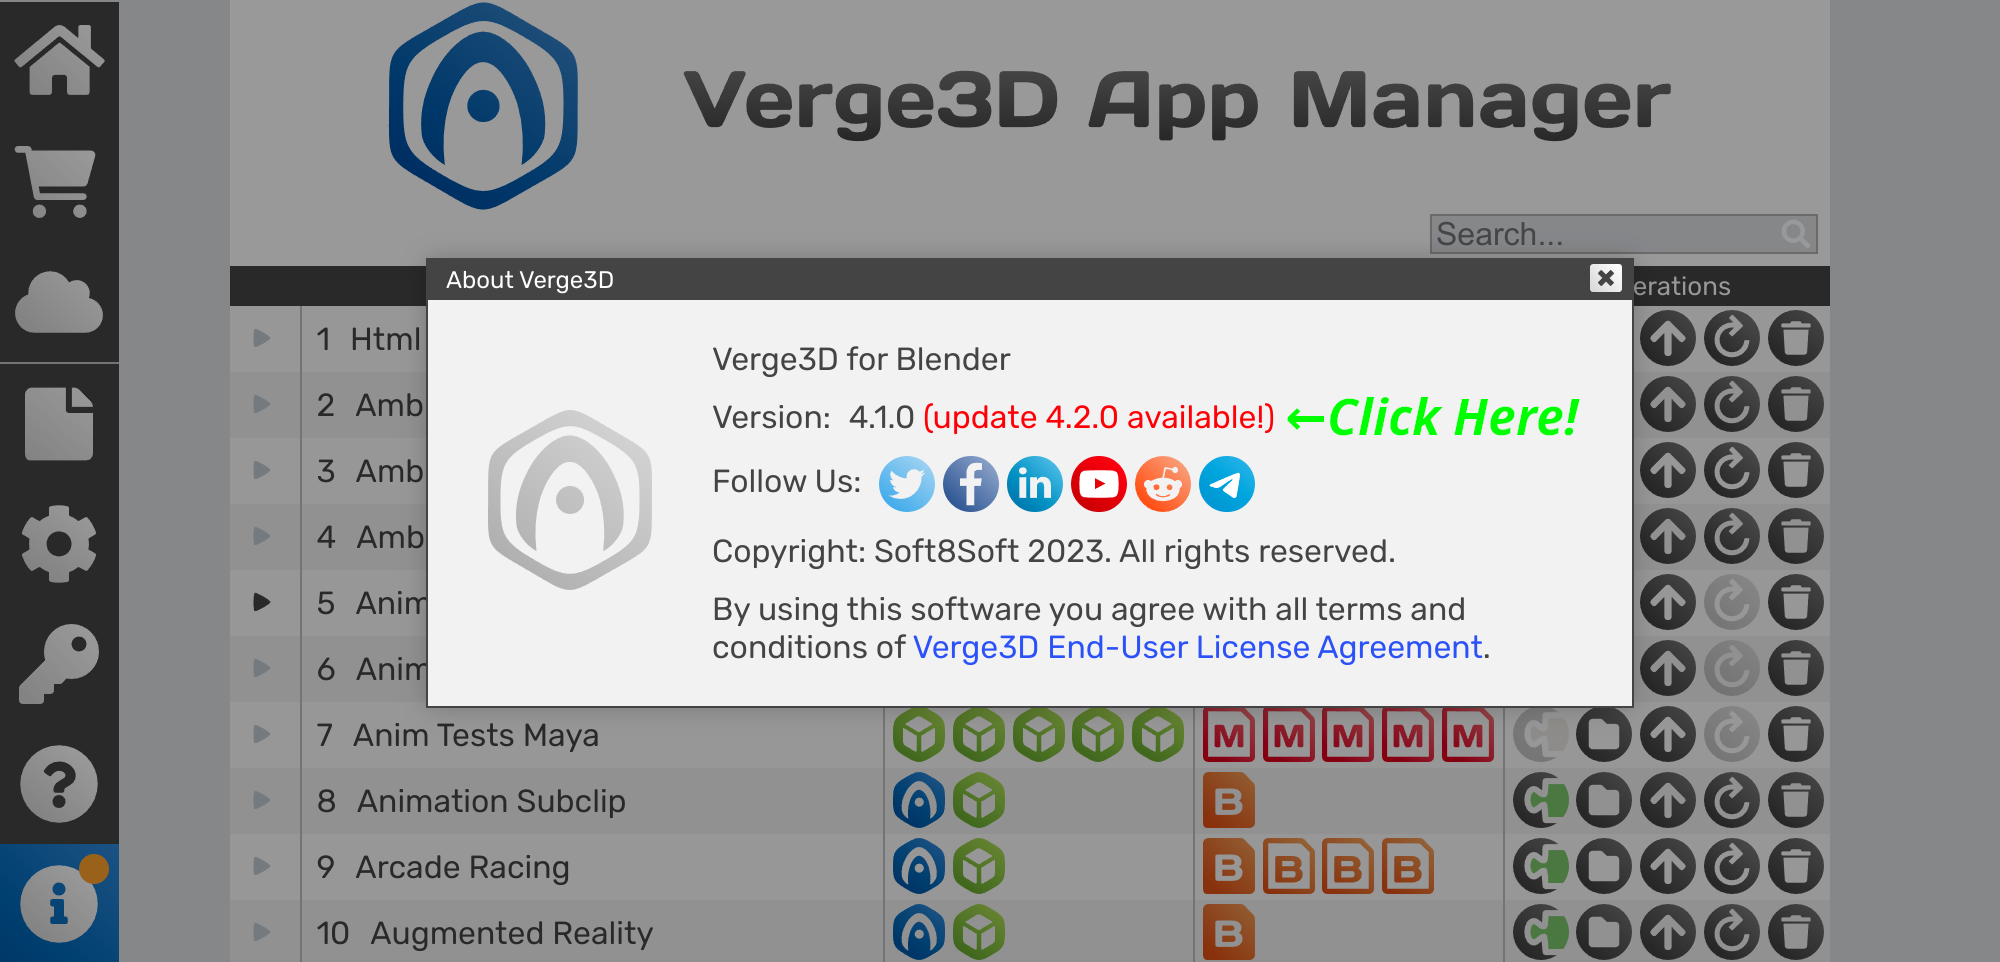 Verge3D update available on About dialog